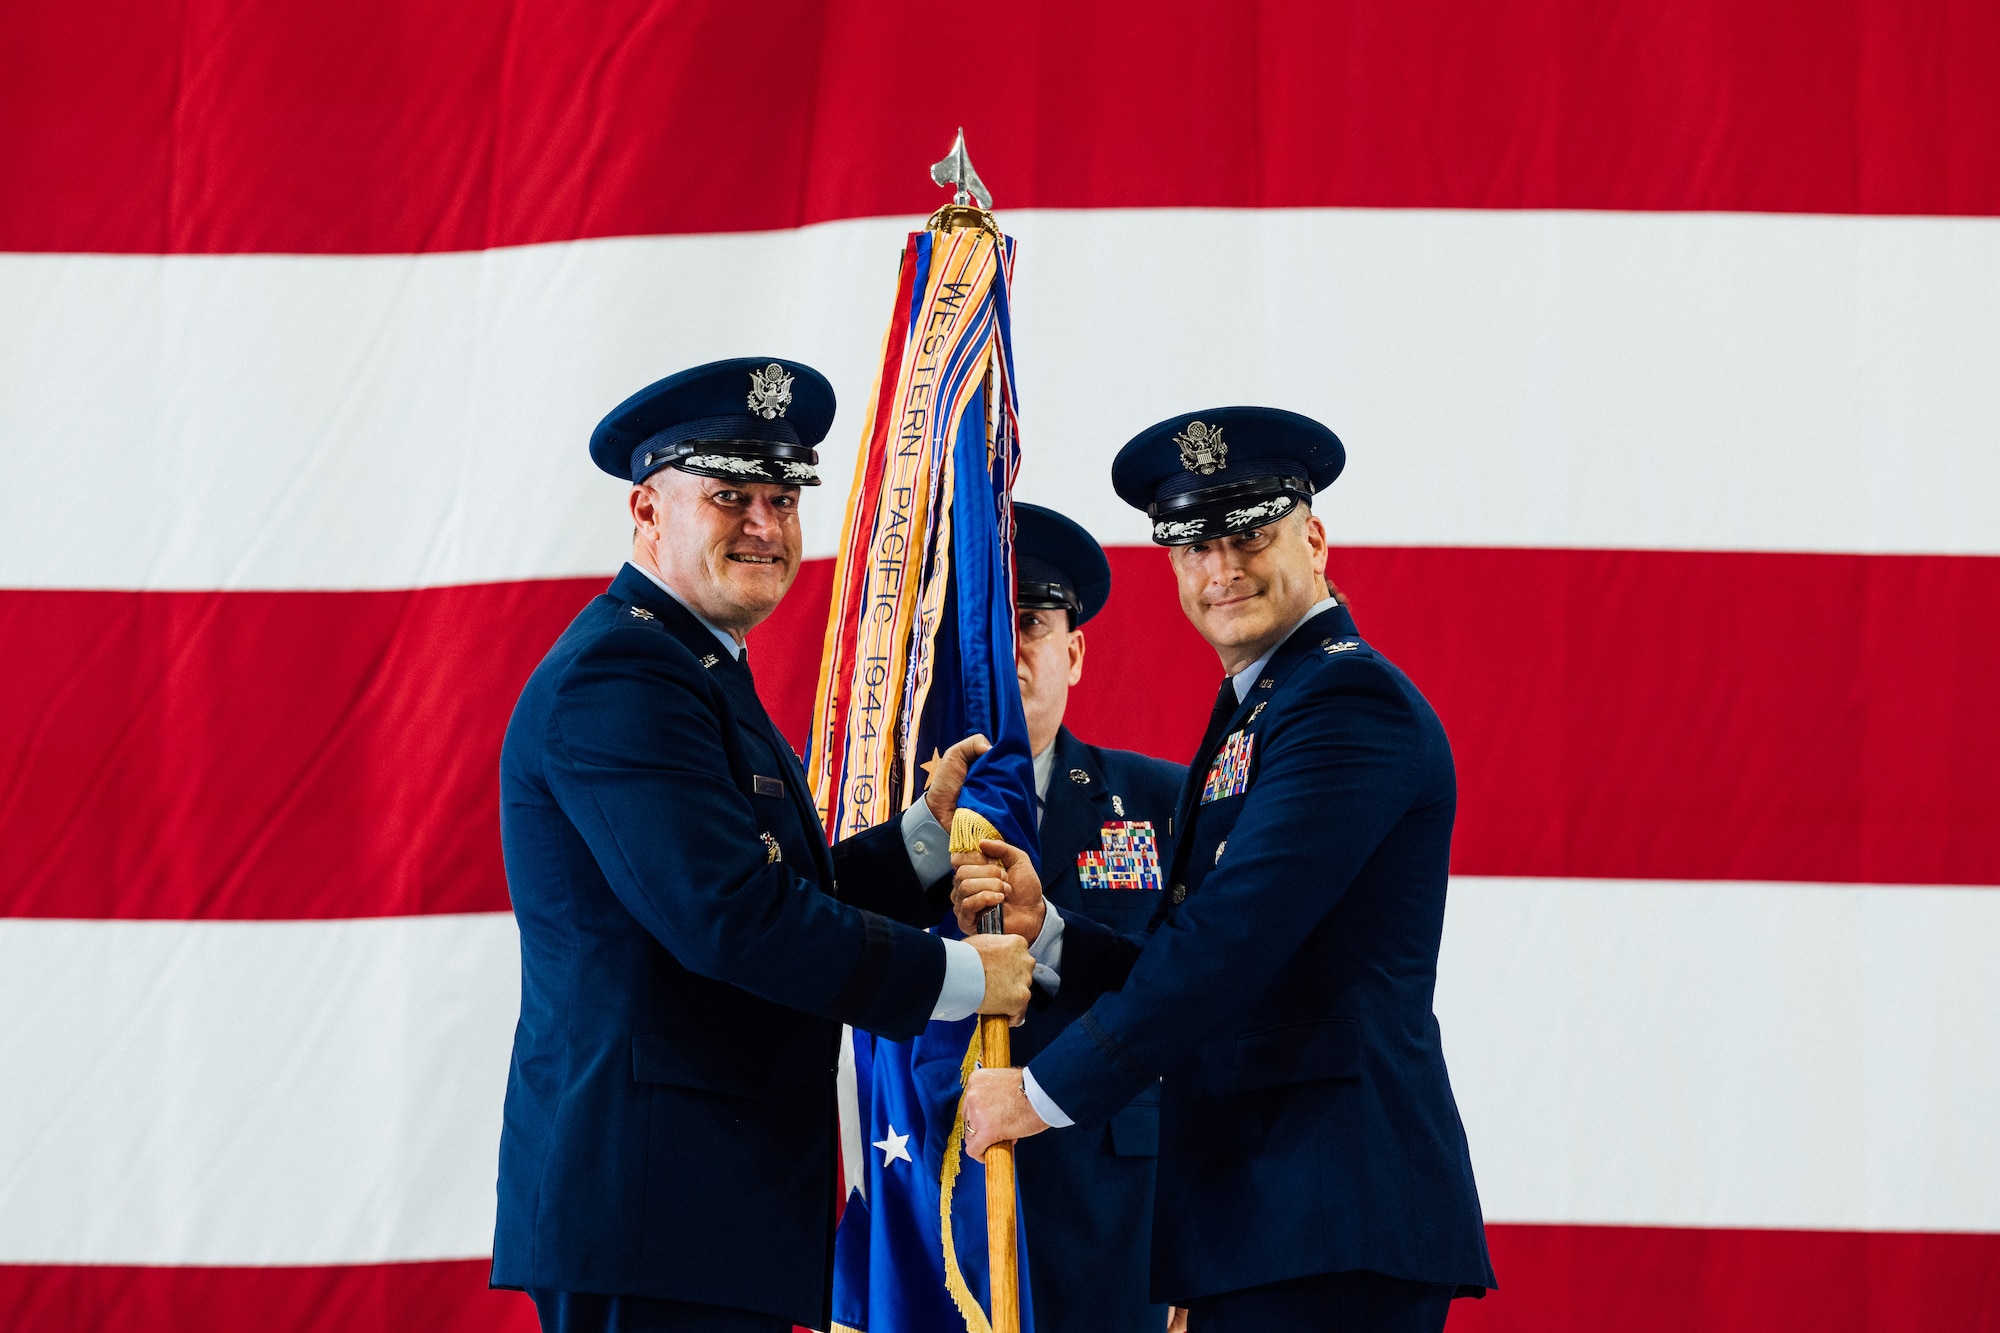 Col. Chris Robinson, right, 375th Air Mobility Wing commander, assumes command of the 375th AMW after receiving the Wing’s guidon from Maj. Gen. Thad Bibb, Jr., 18th Air Force commander, on Scott Air Force Base, Illinois, July 1, 2021. The change of command ceremony represents a time-honored military tradition providing an opportunity for Airmen to witness the transfer of power to their newly appointed commanding officer. (U.S. Air Force photo by Tech. Sgt. Jordan Castelan)